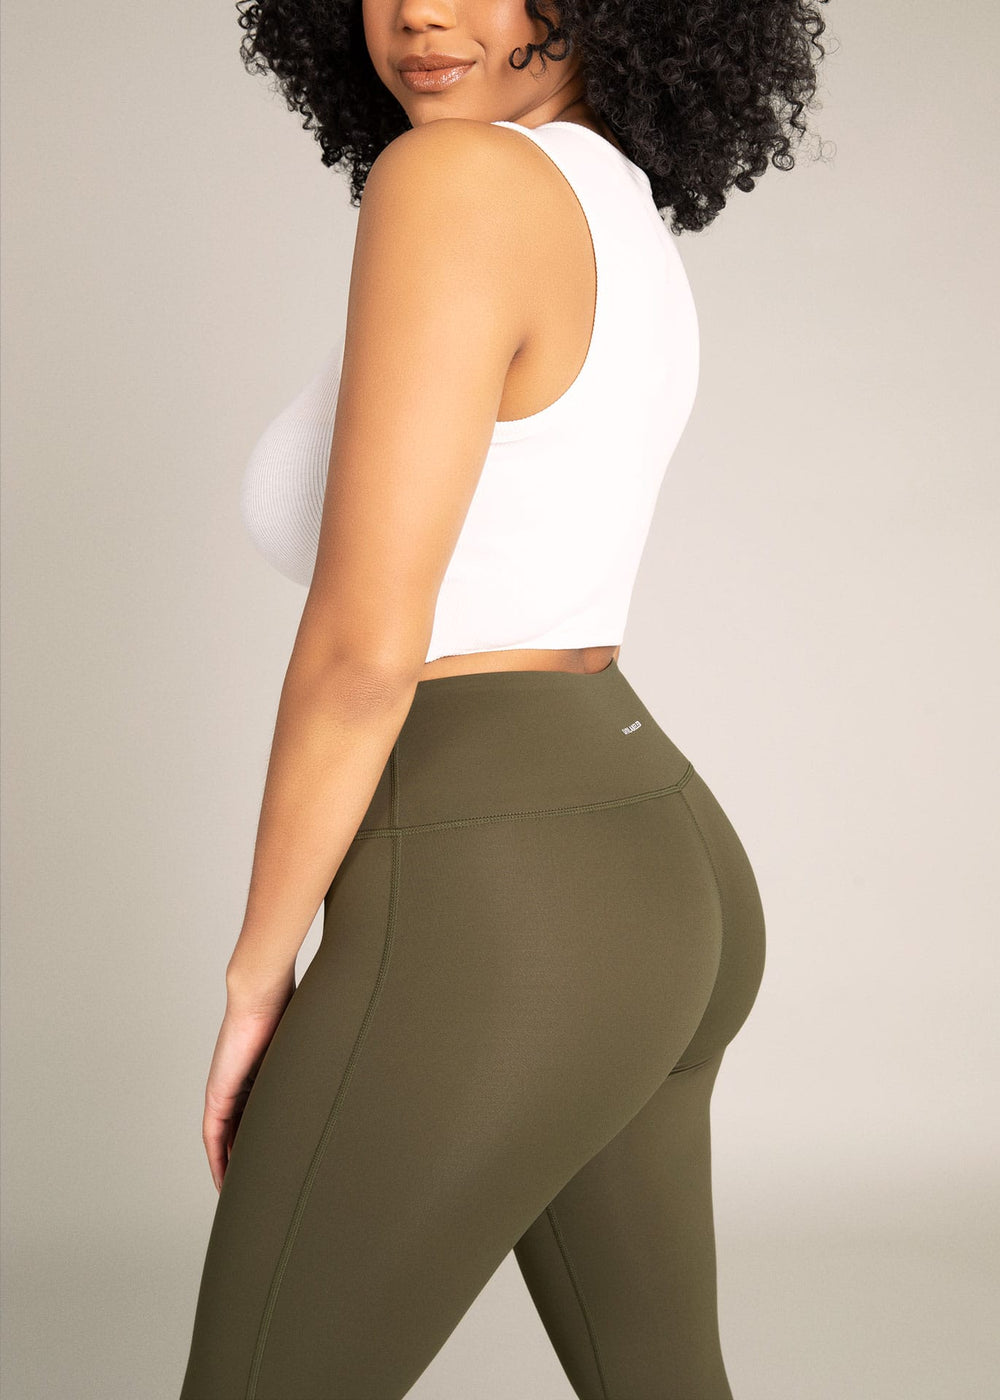 Cable Knit High Waist Leggings - Olive